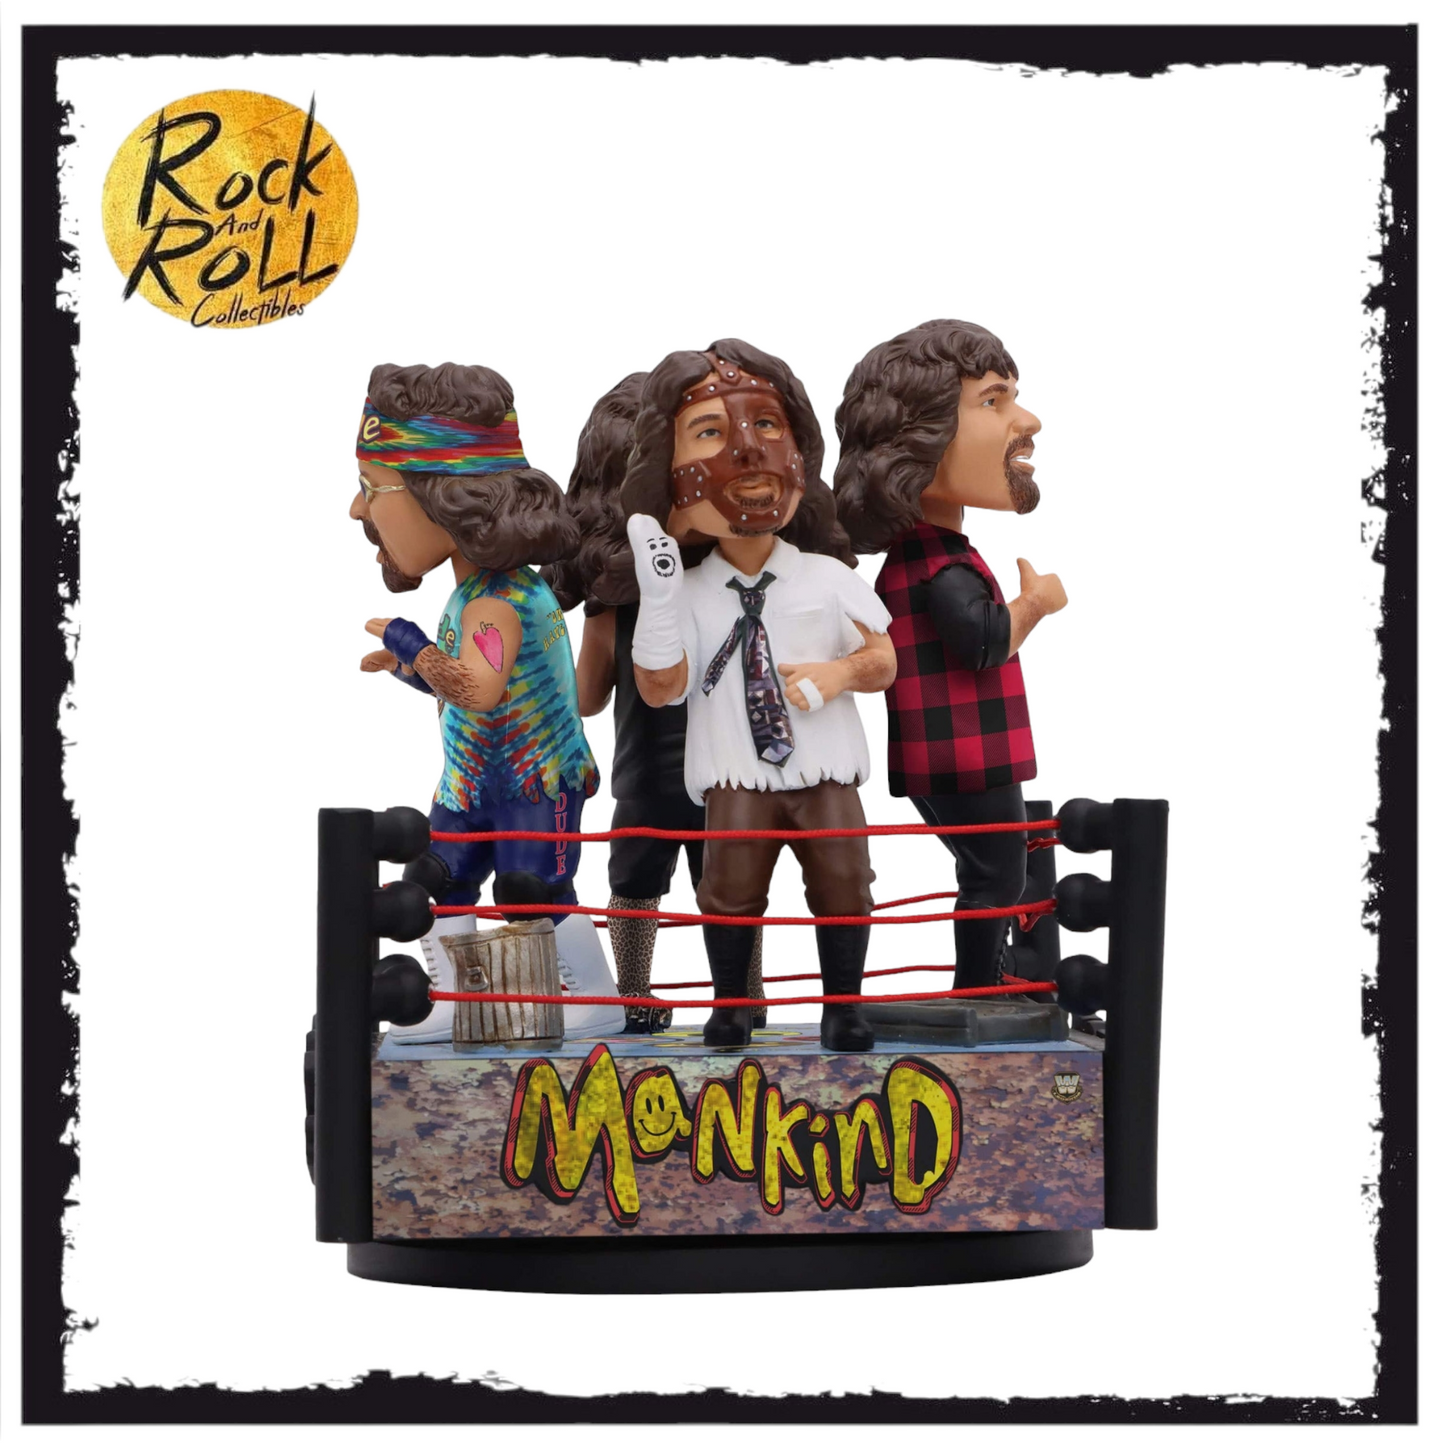 Mick Foley & Mankind & Cactus Jack & Dude Love Faces of Foley WWE Quad Spinner Bobblehead